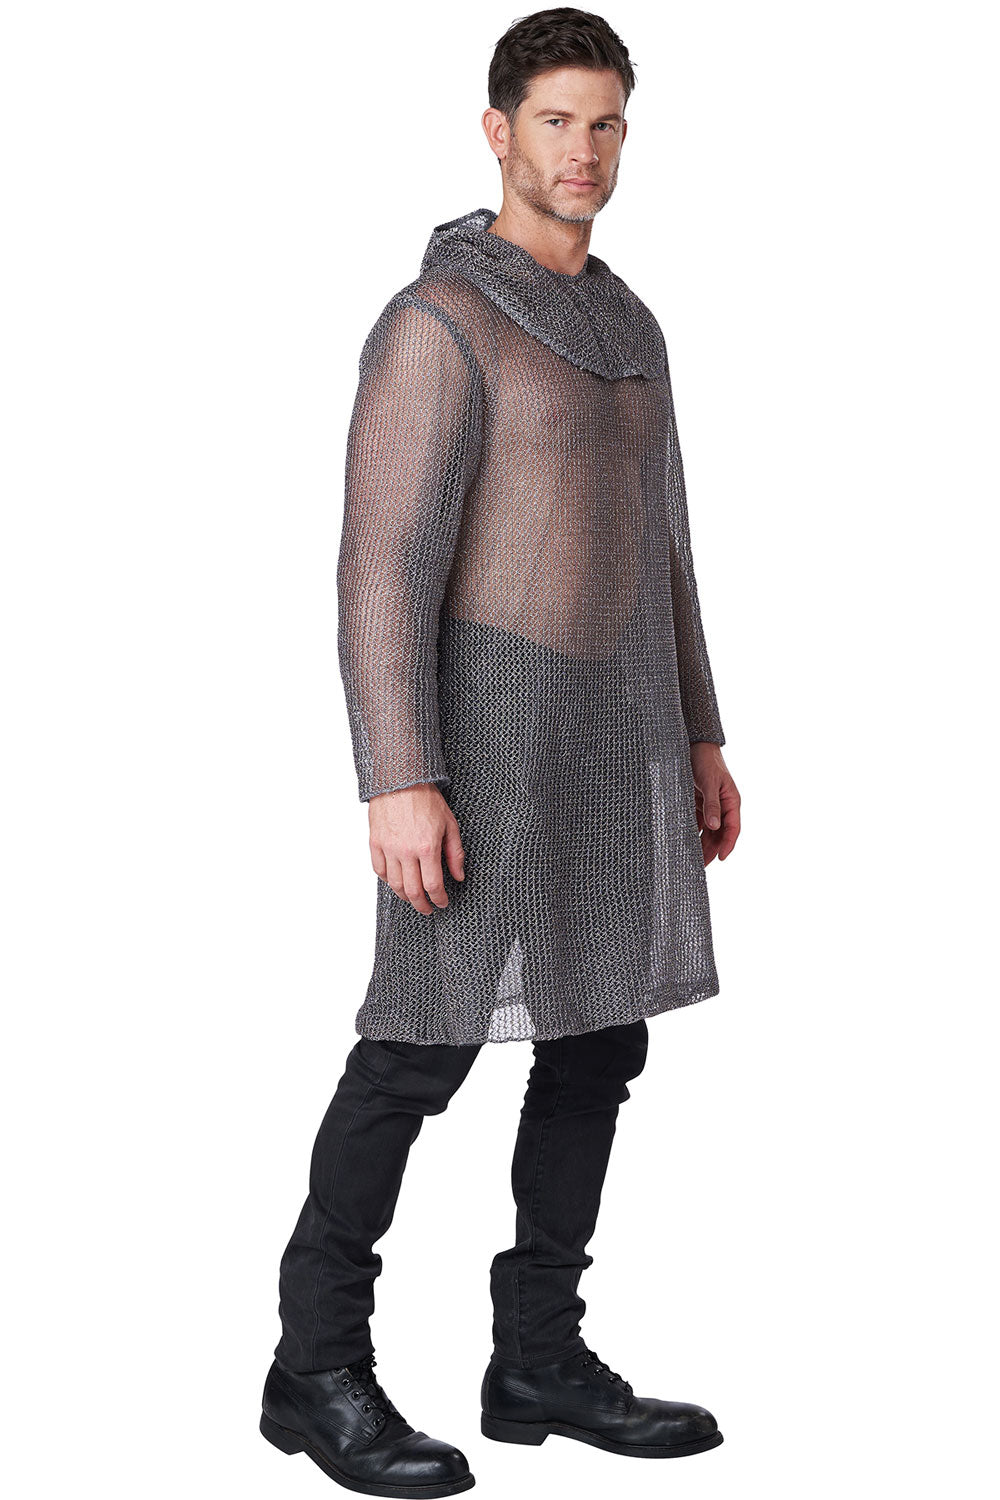 Metallic Knit Chainmail Tunic And Cowl / Adult California Costume 5220/015